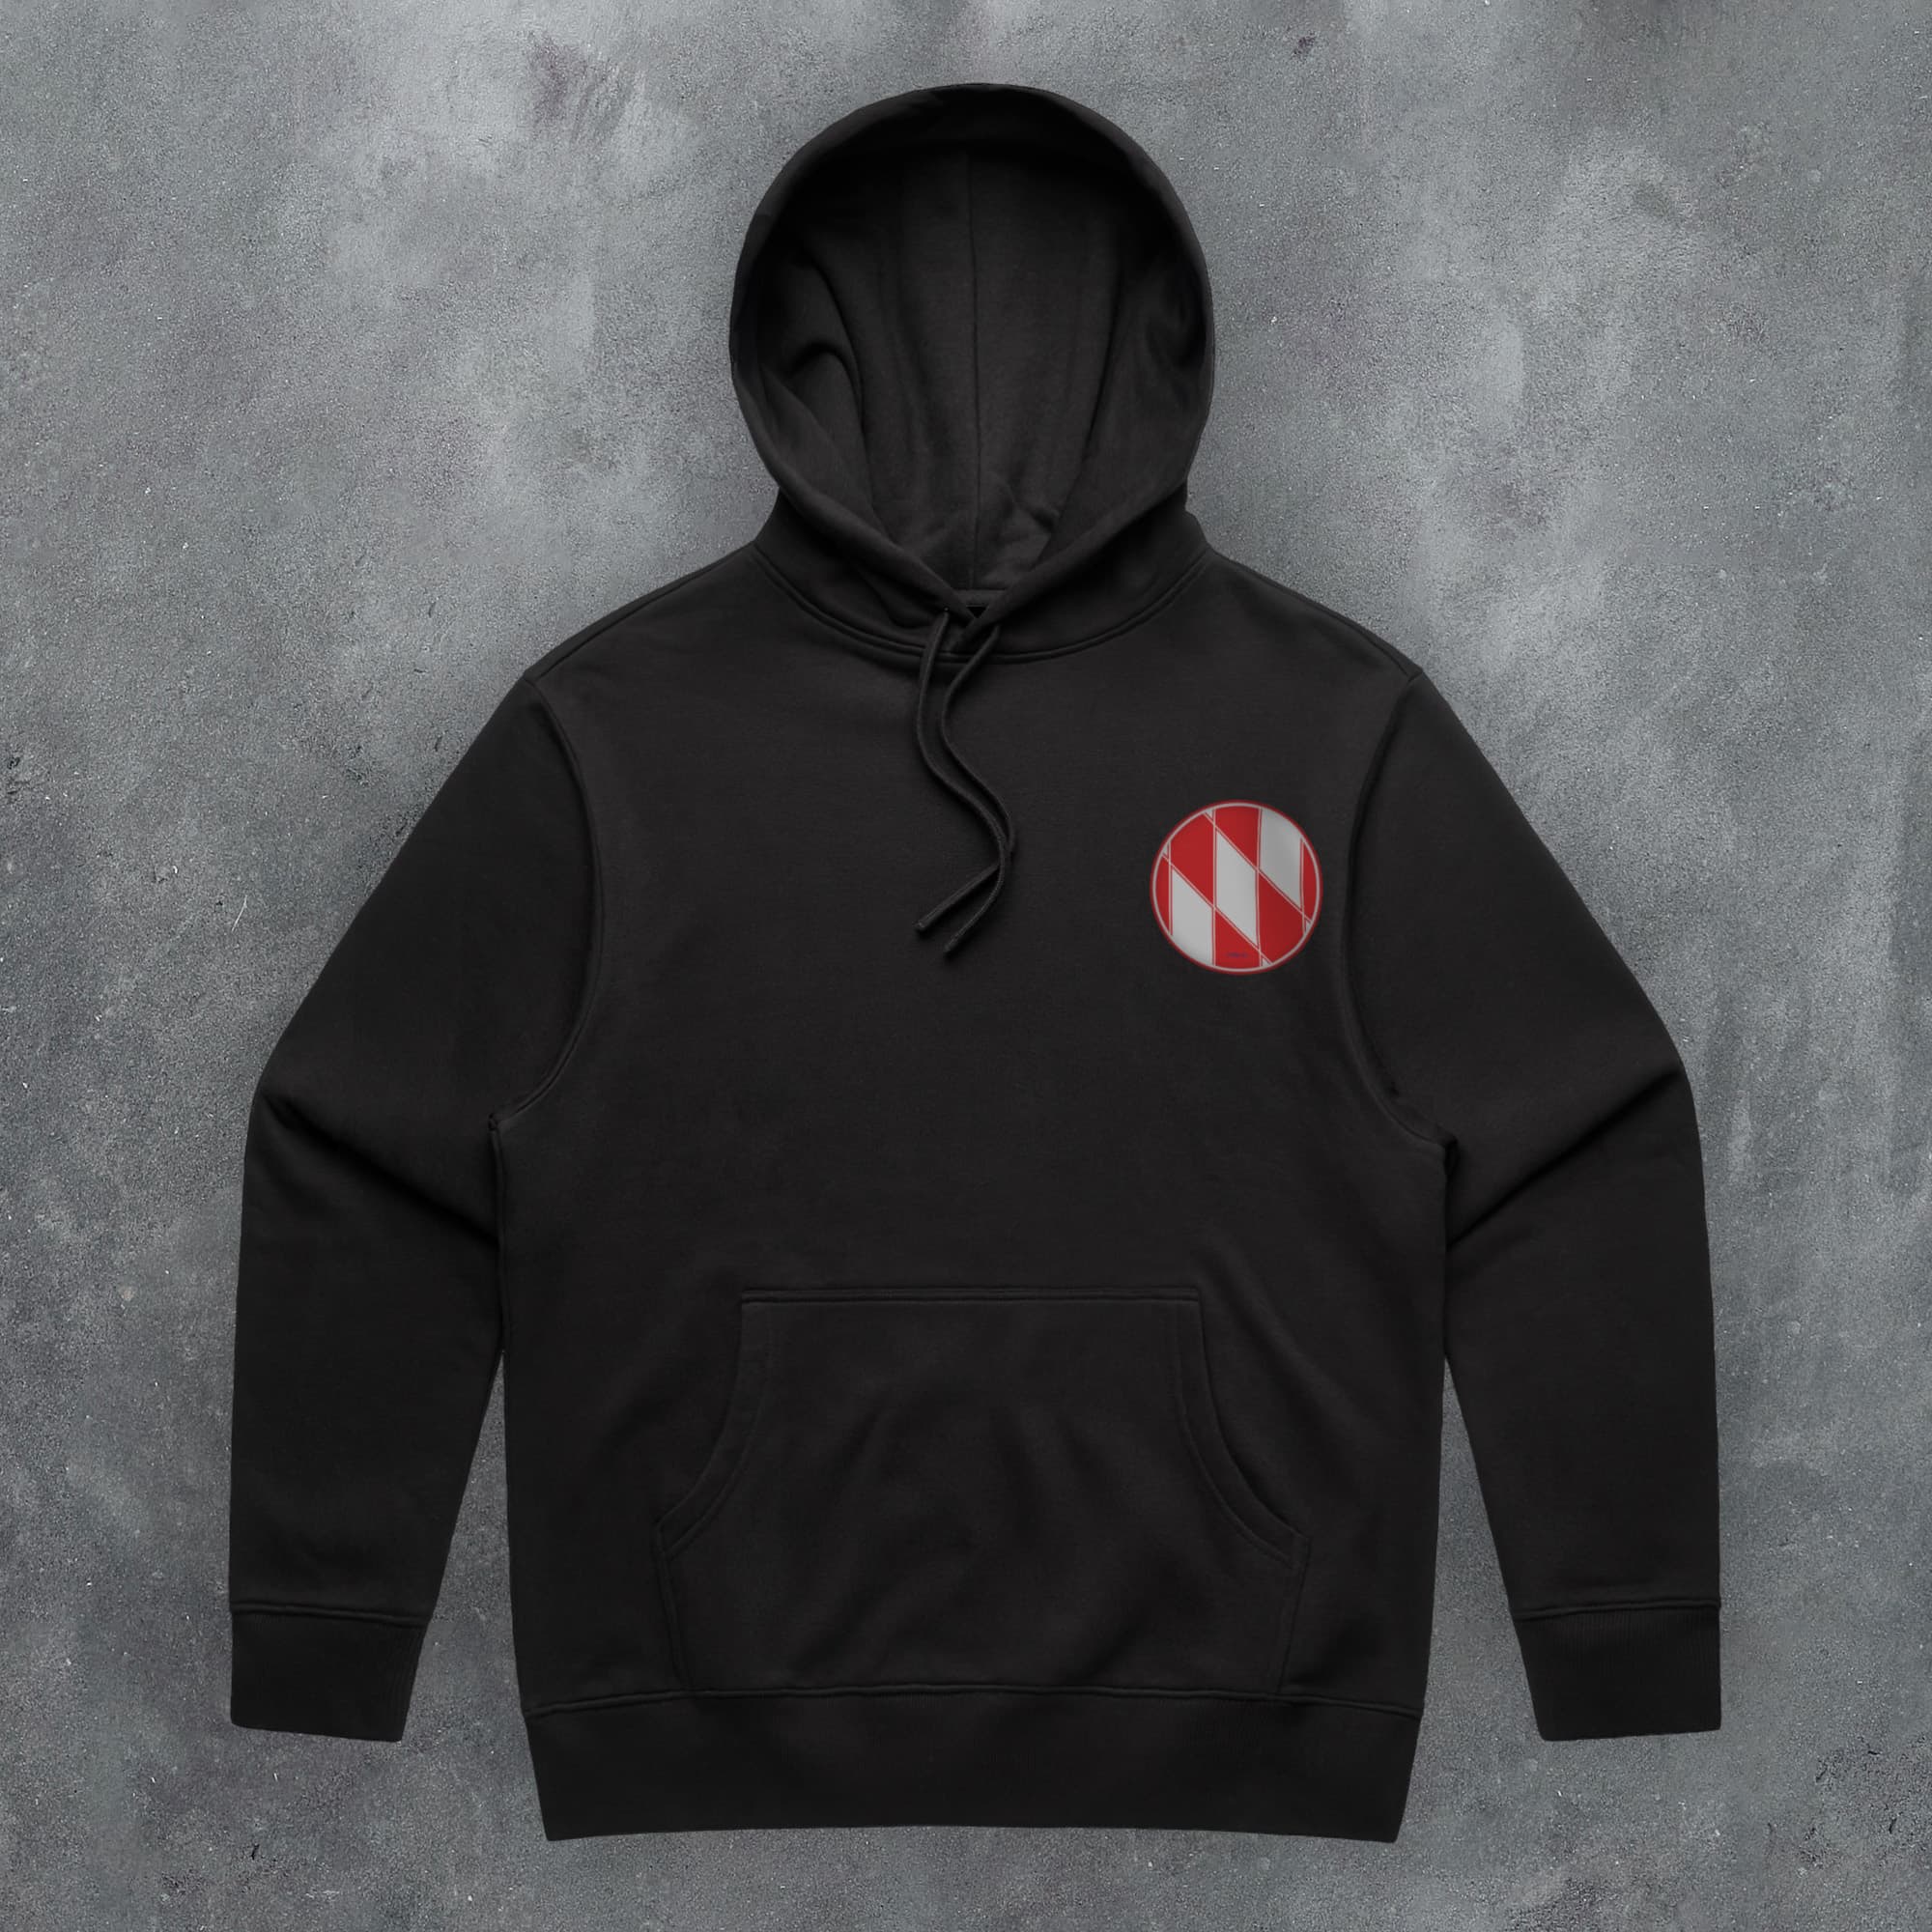 a black hoodie with a red and white checkered logo